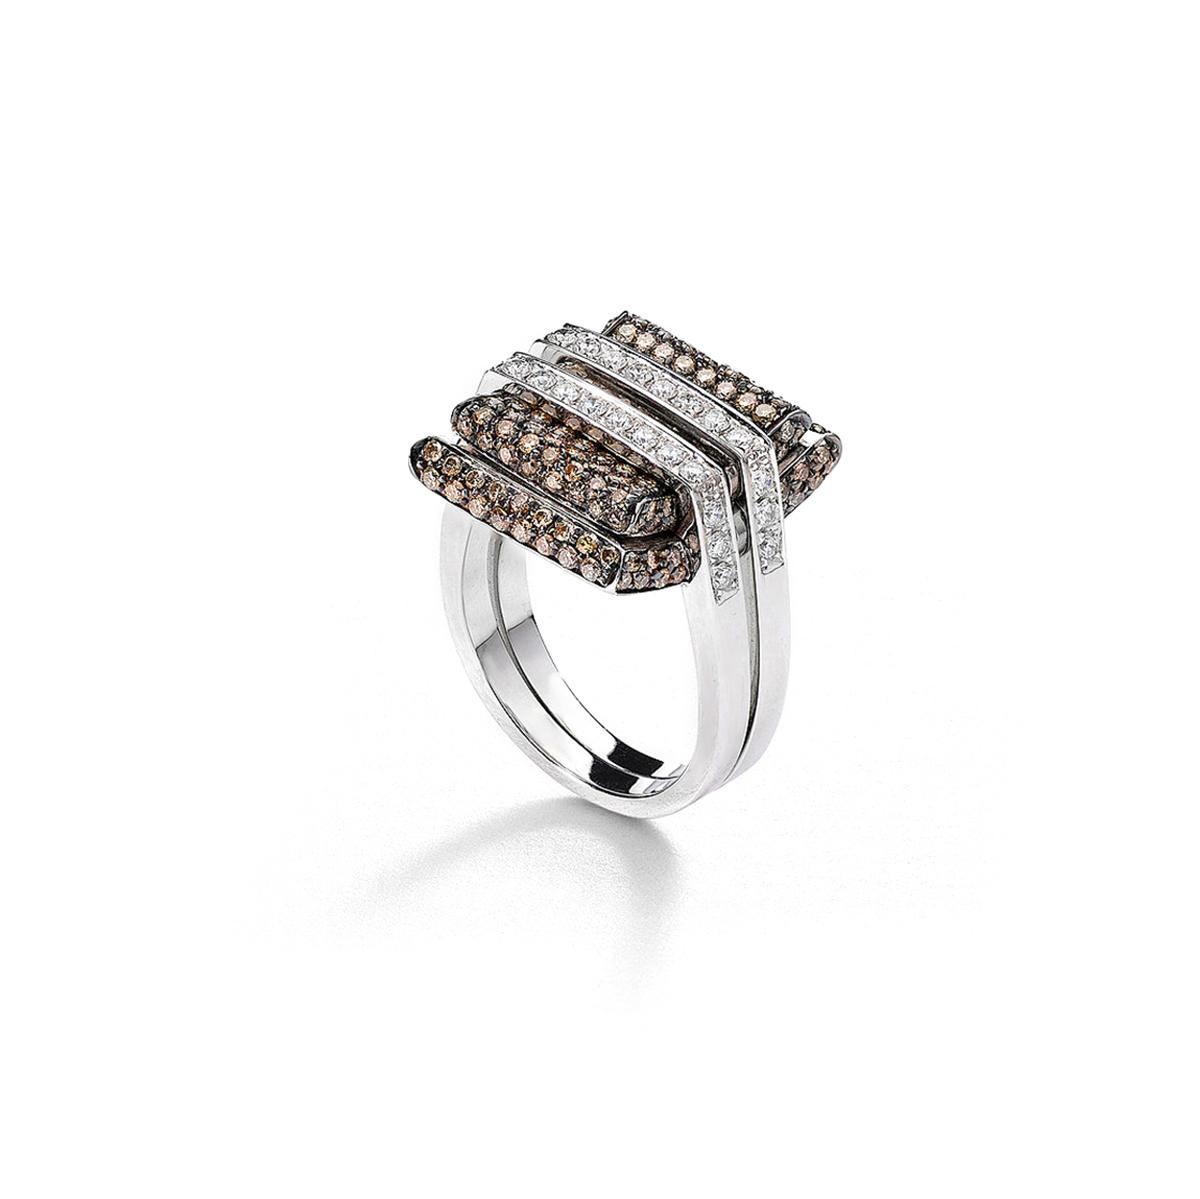 Ring in 18kt white gold set with 28 diamonds 0.51 cts and 151 brown diamonds 1.17 cts Size 54